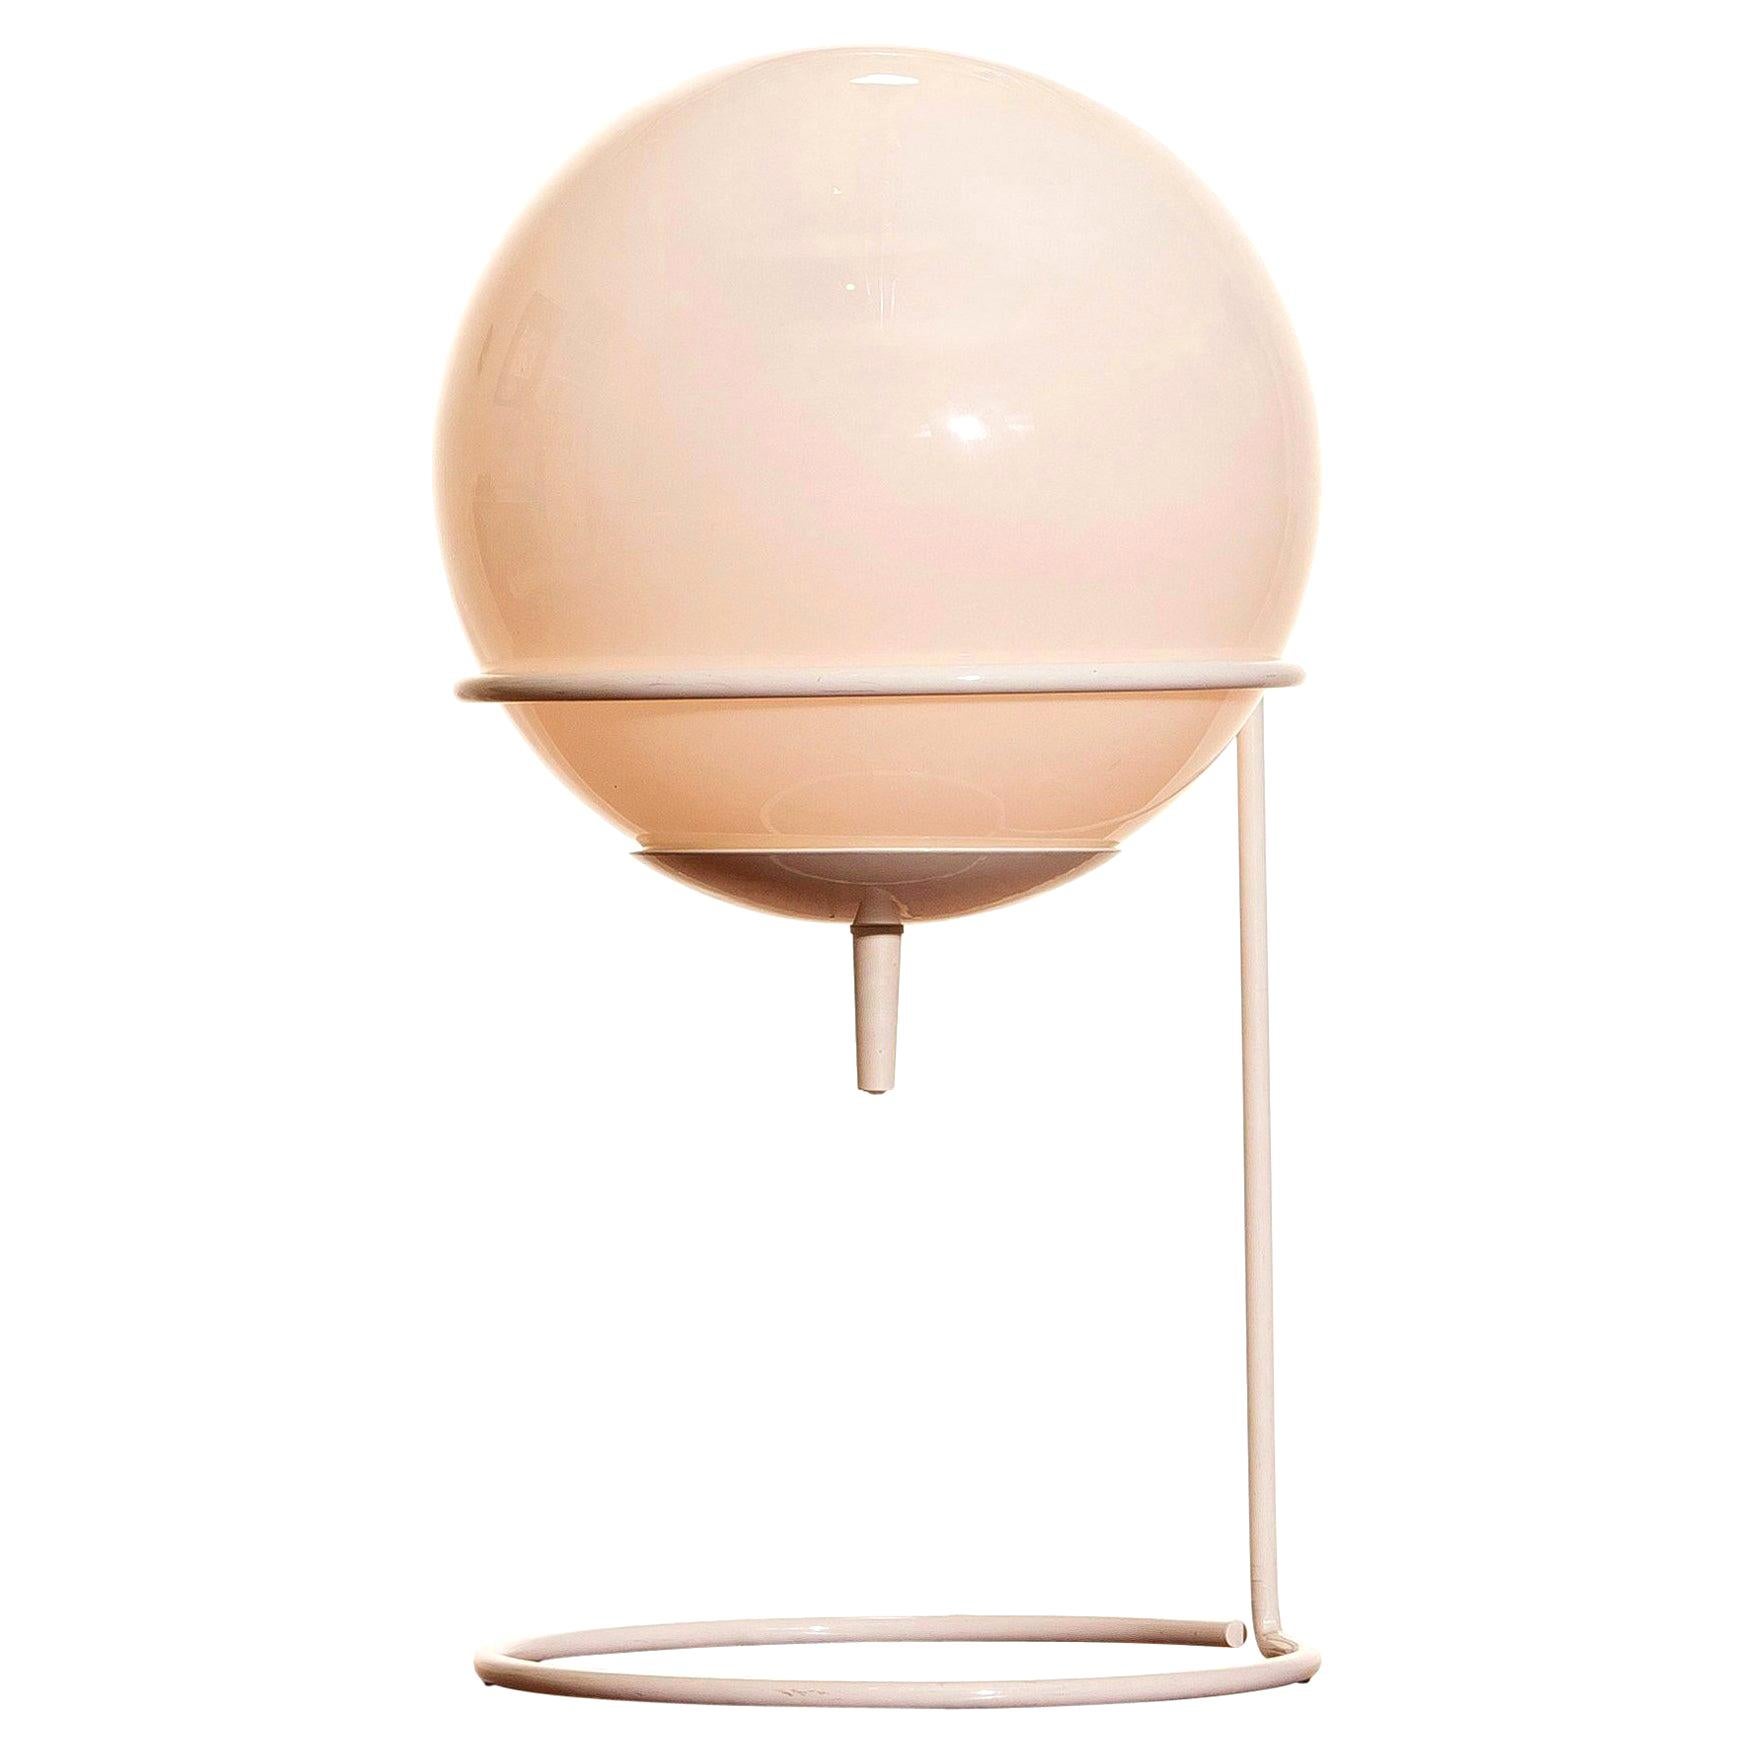 1970s, White Glass Table Lamp by Hala Zeist "the Basket" on a White Metal Frame